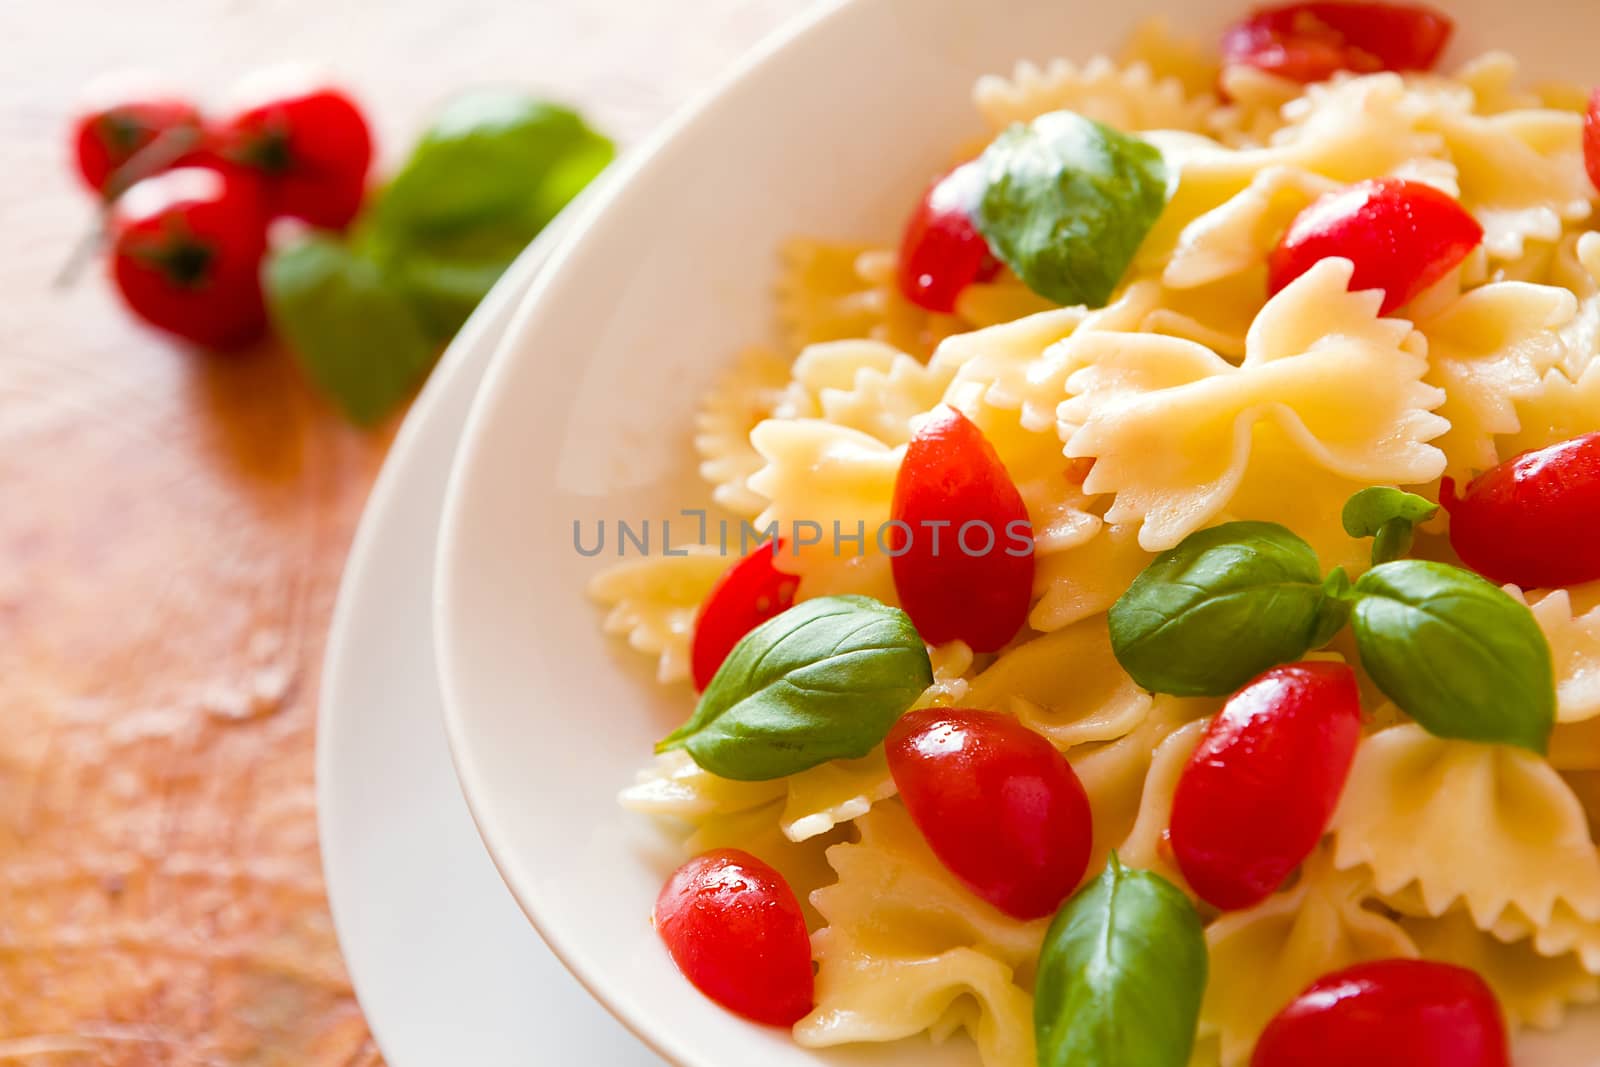 Closeup of Farfalle pasta with cherry tomatoes and basil over a colored background